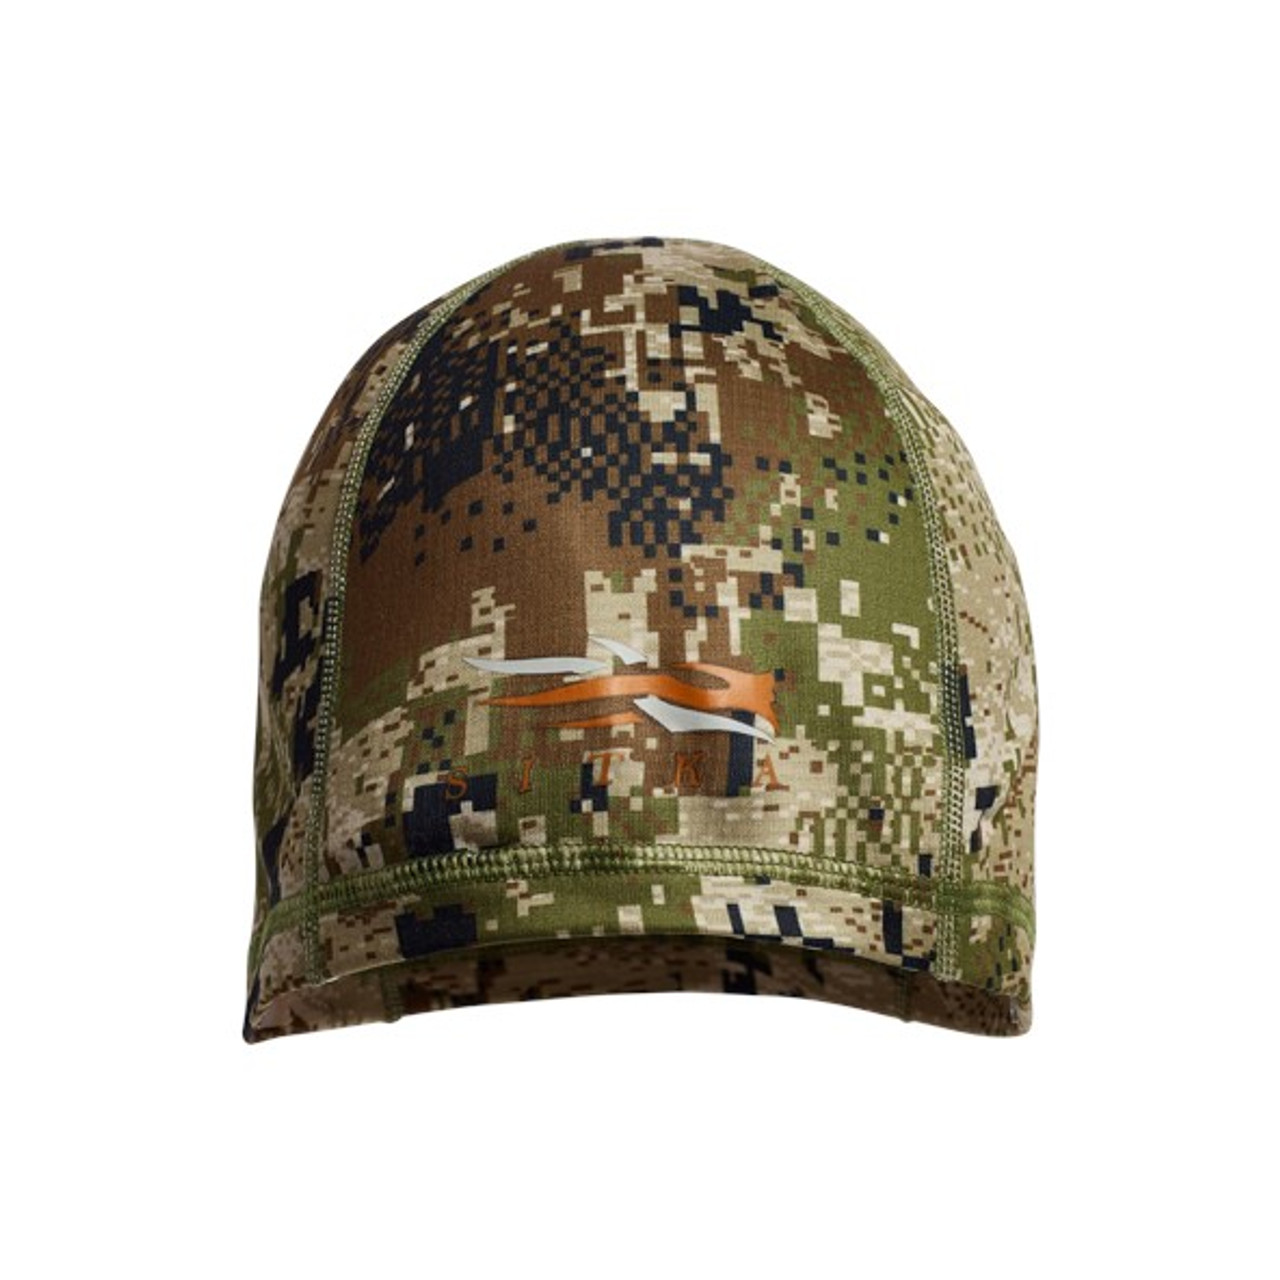 Sitka Traverse Cap - Optifade Subalpine - One Size Fits Most